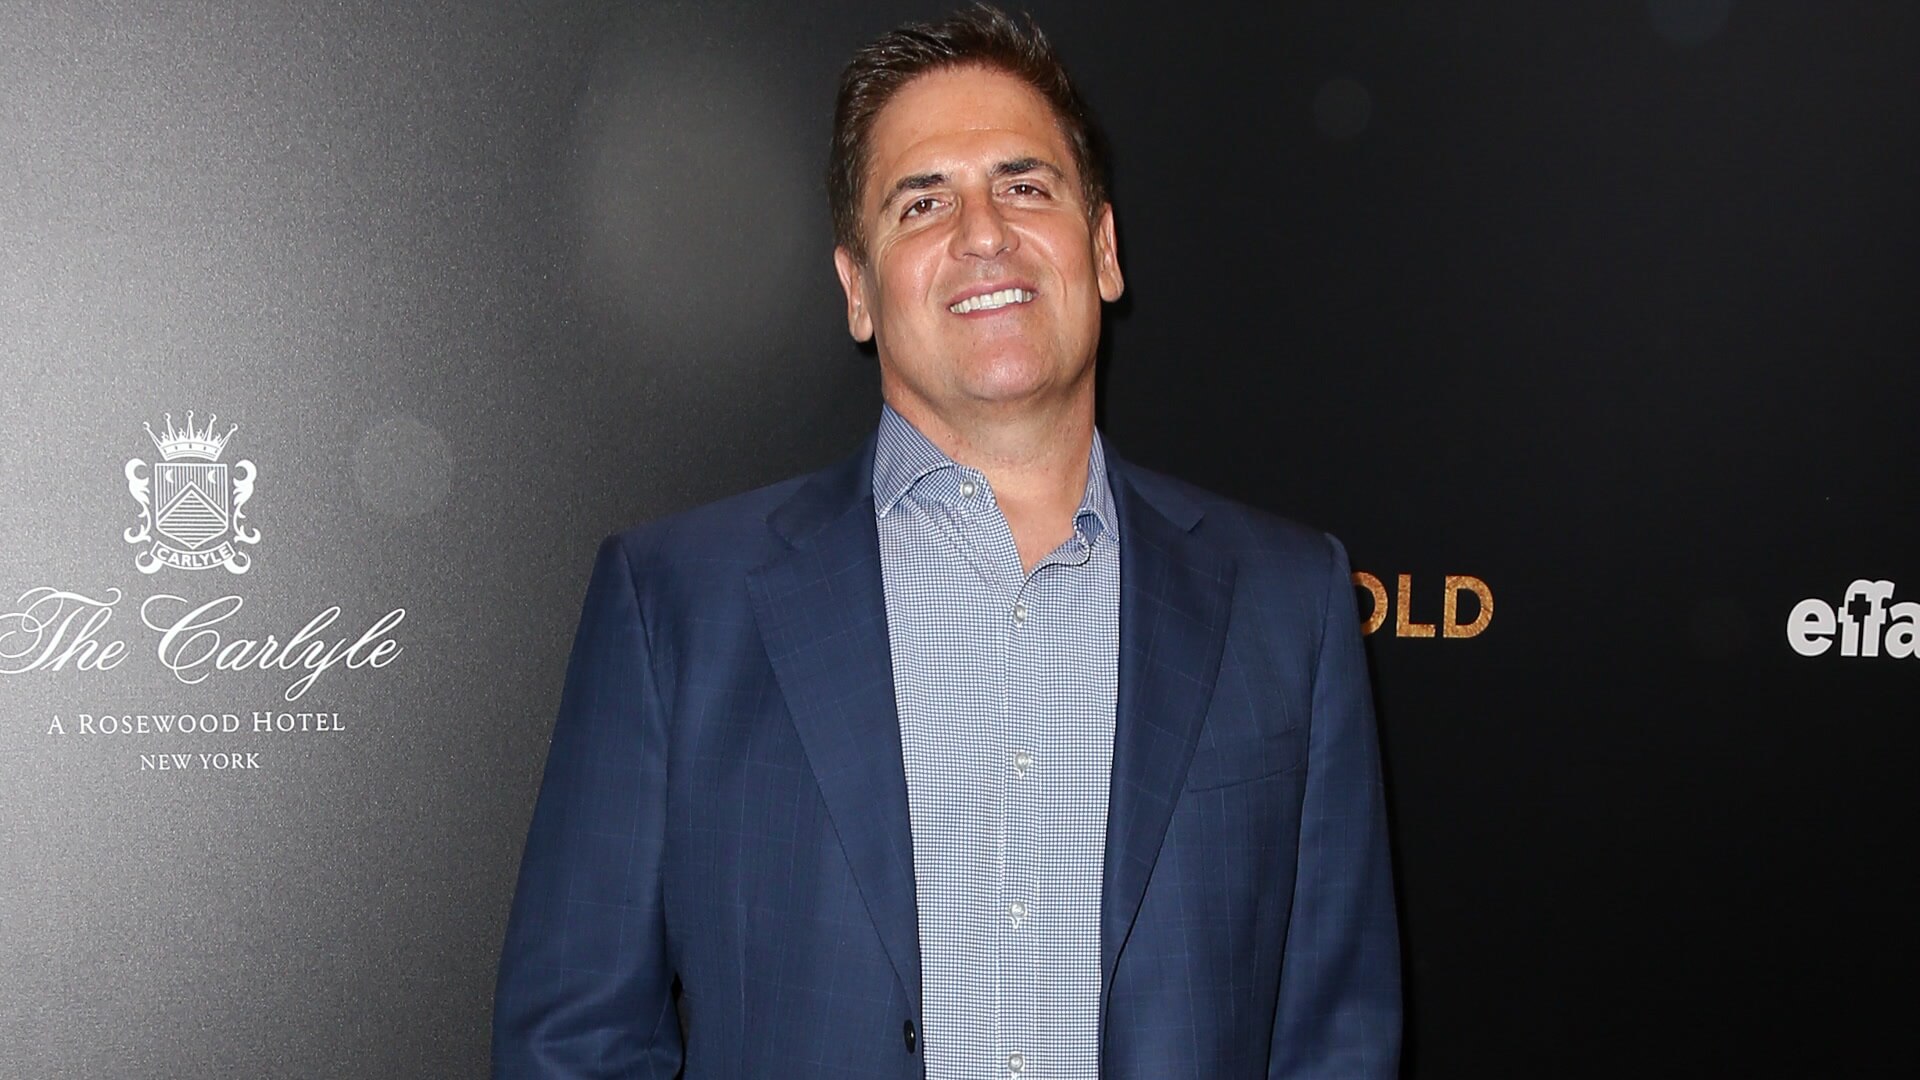 Cost Plus Drugs Co-founder Mark Cuban, Full Interview